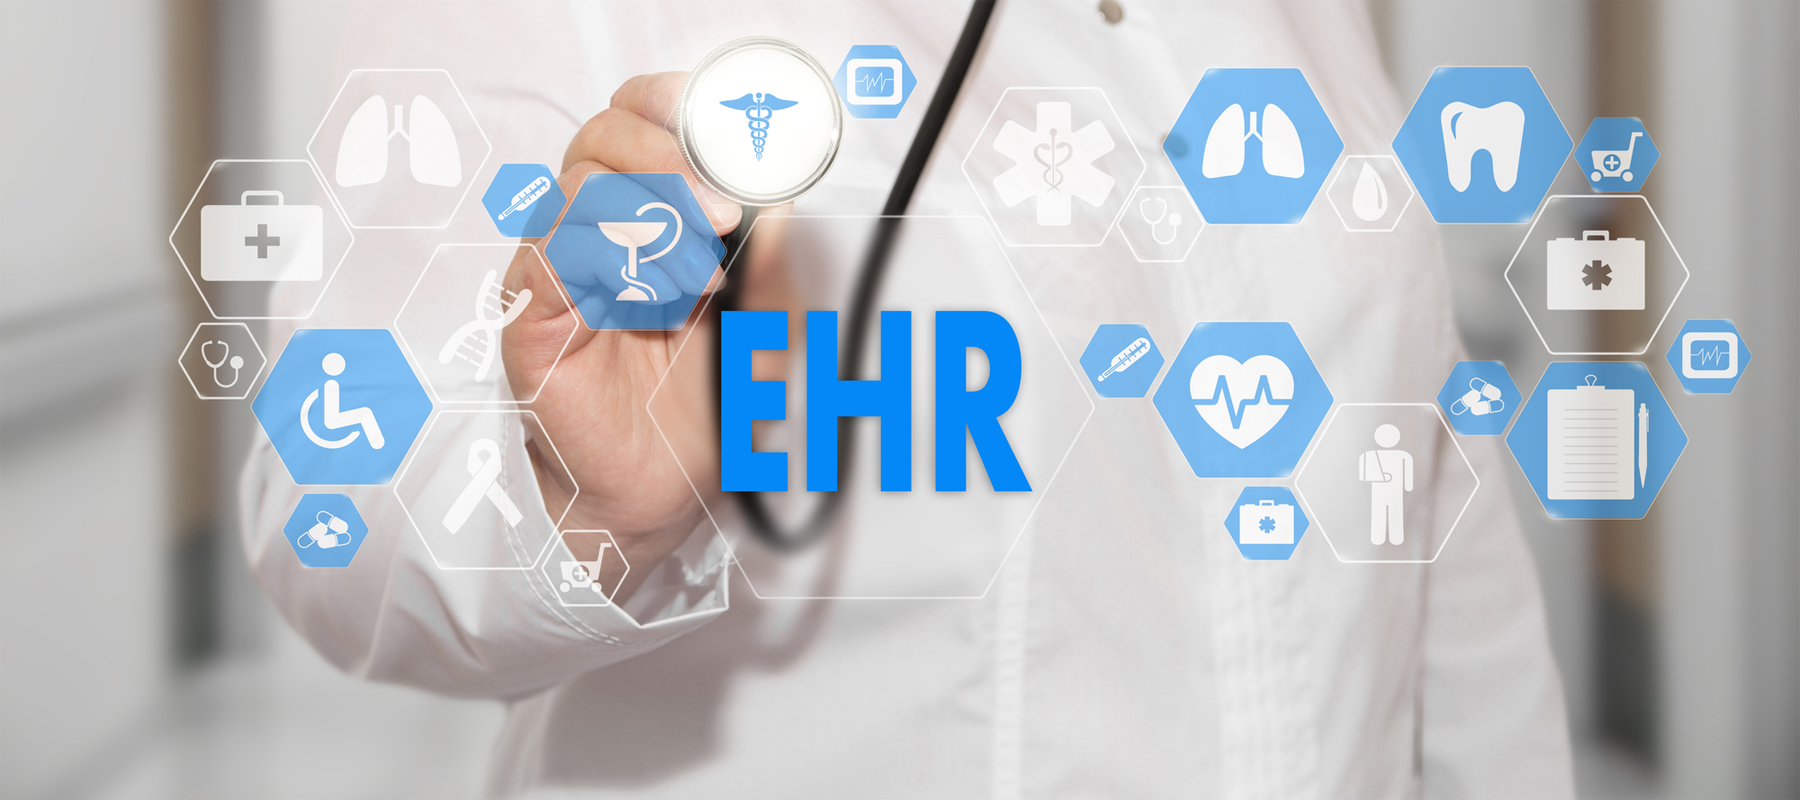 EHR Electronic Health Records on a Computer